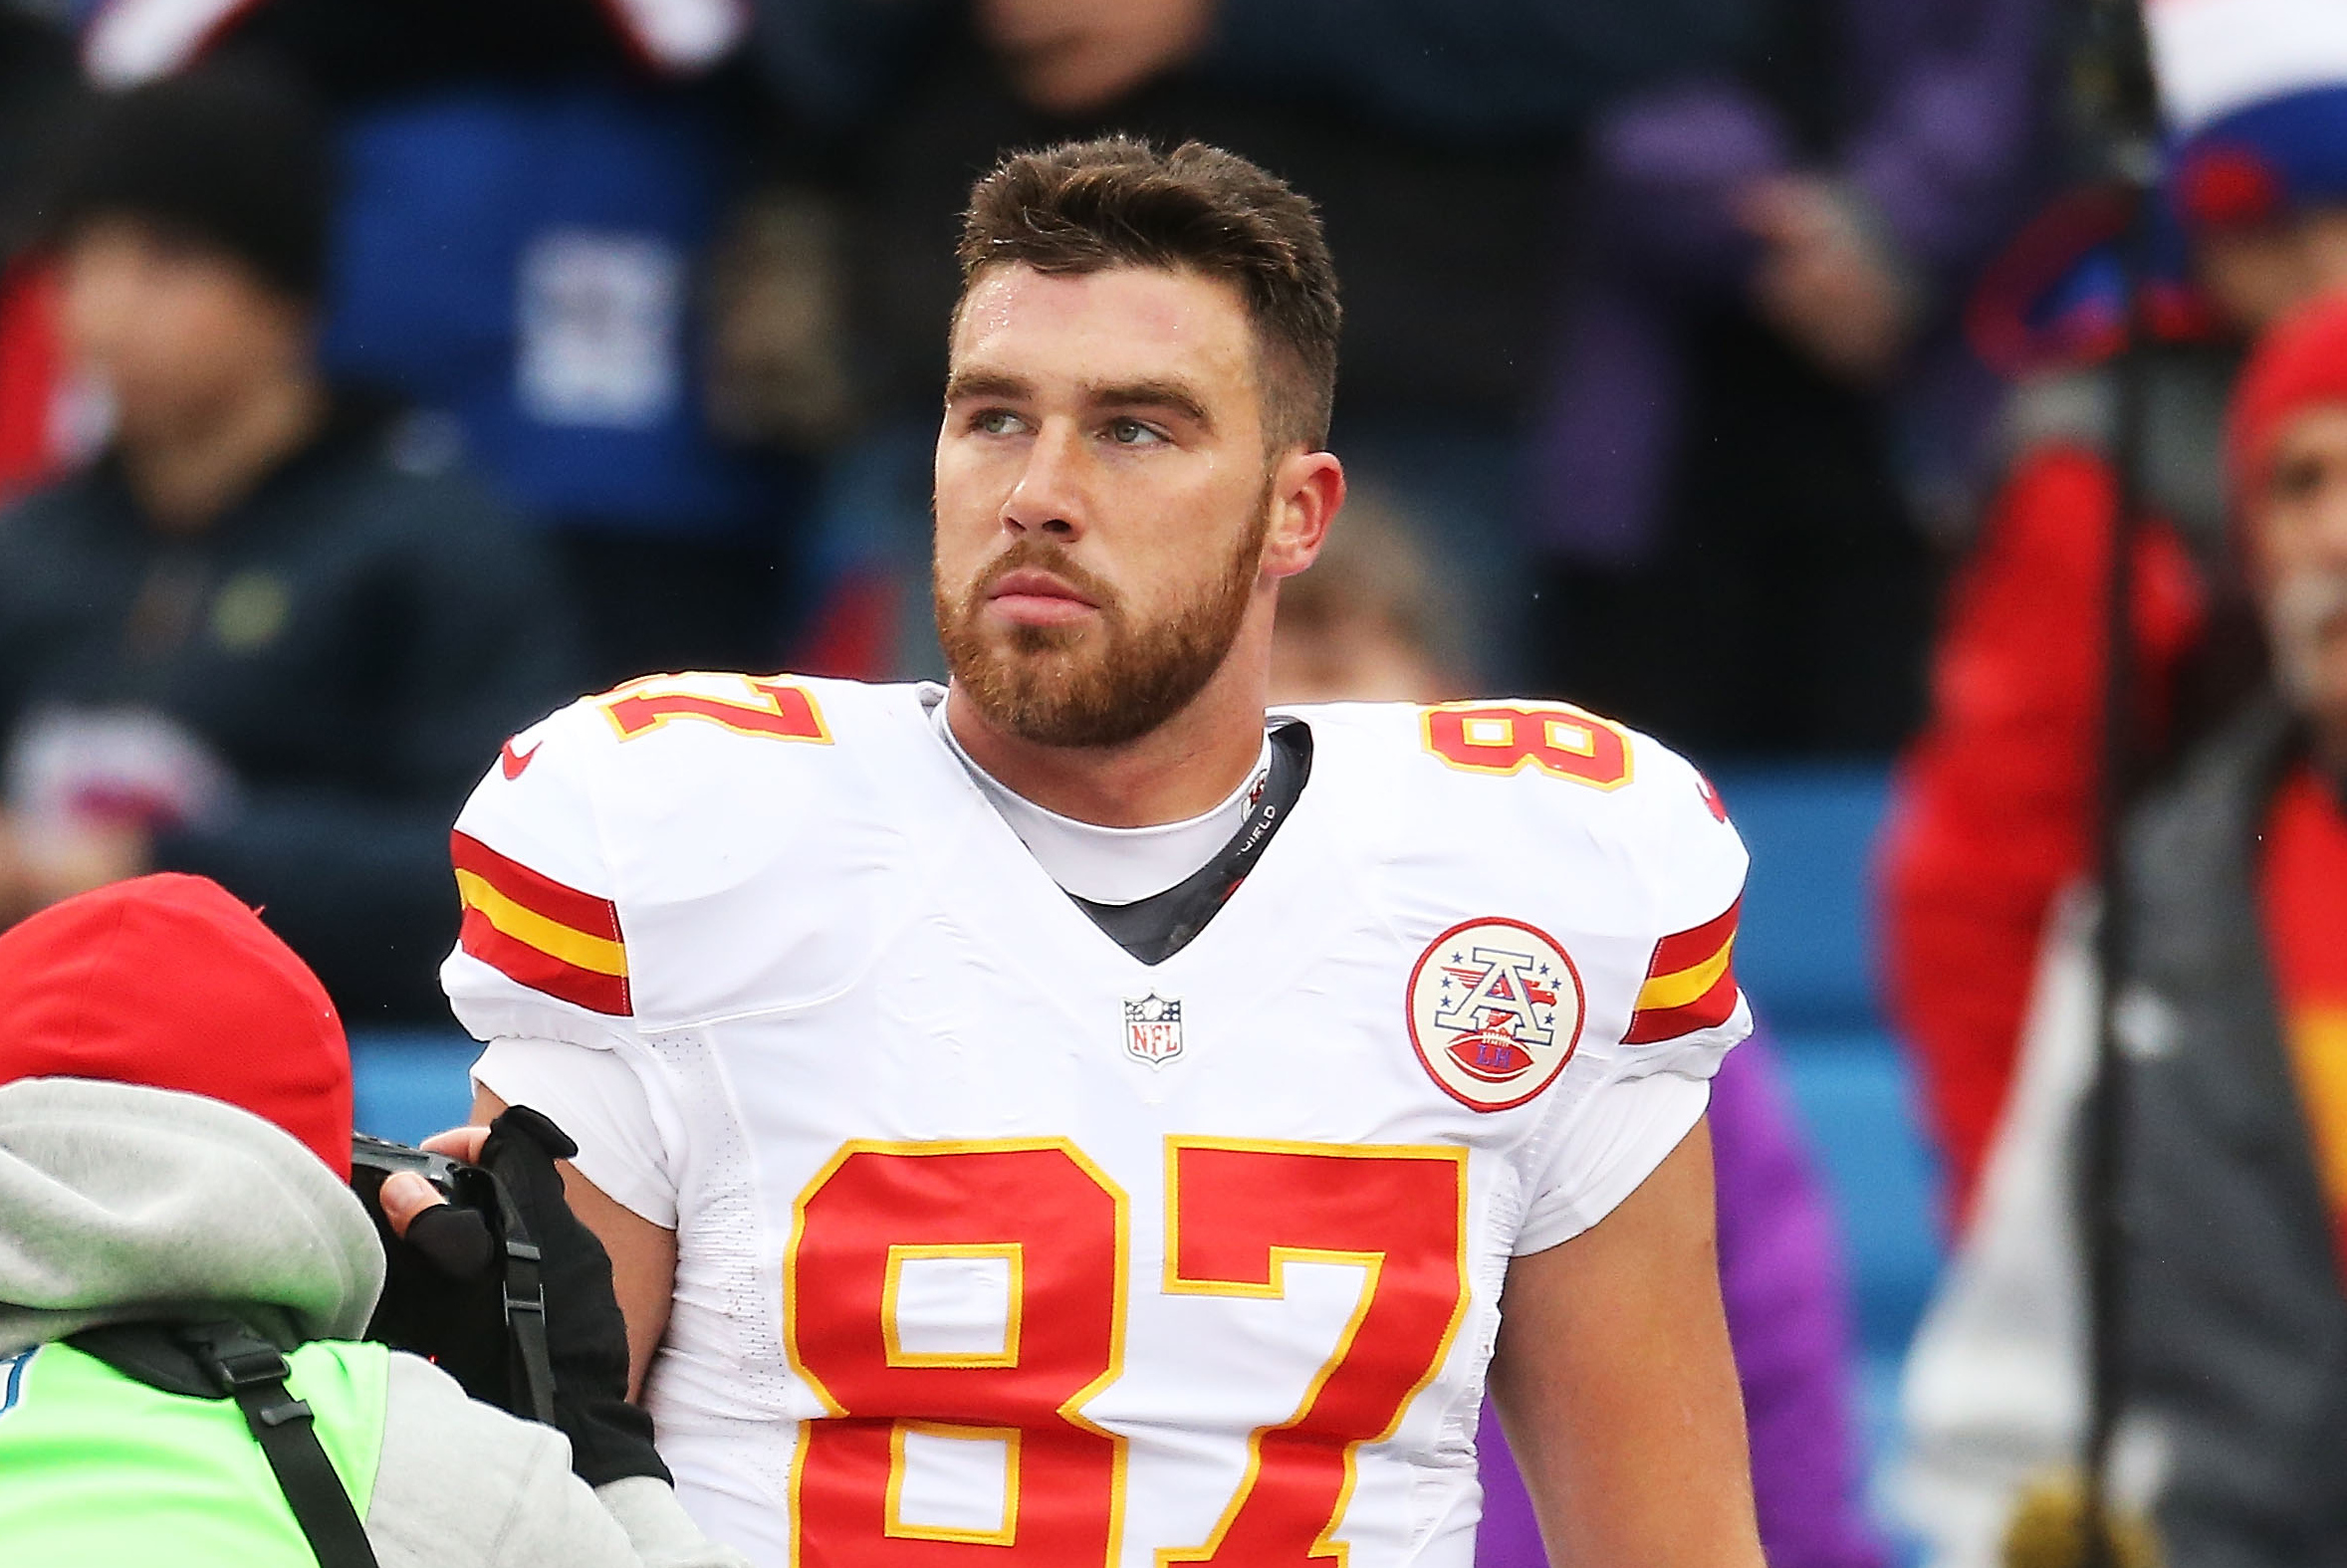 What Does Travis Kelce Smell Like?